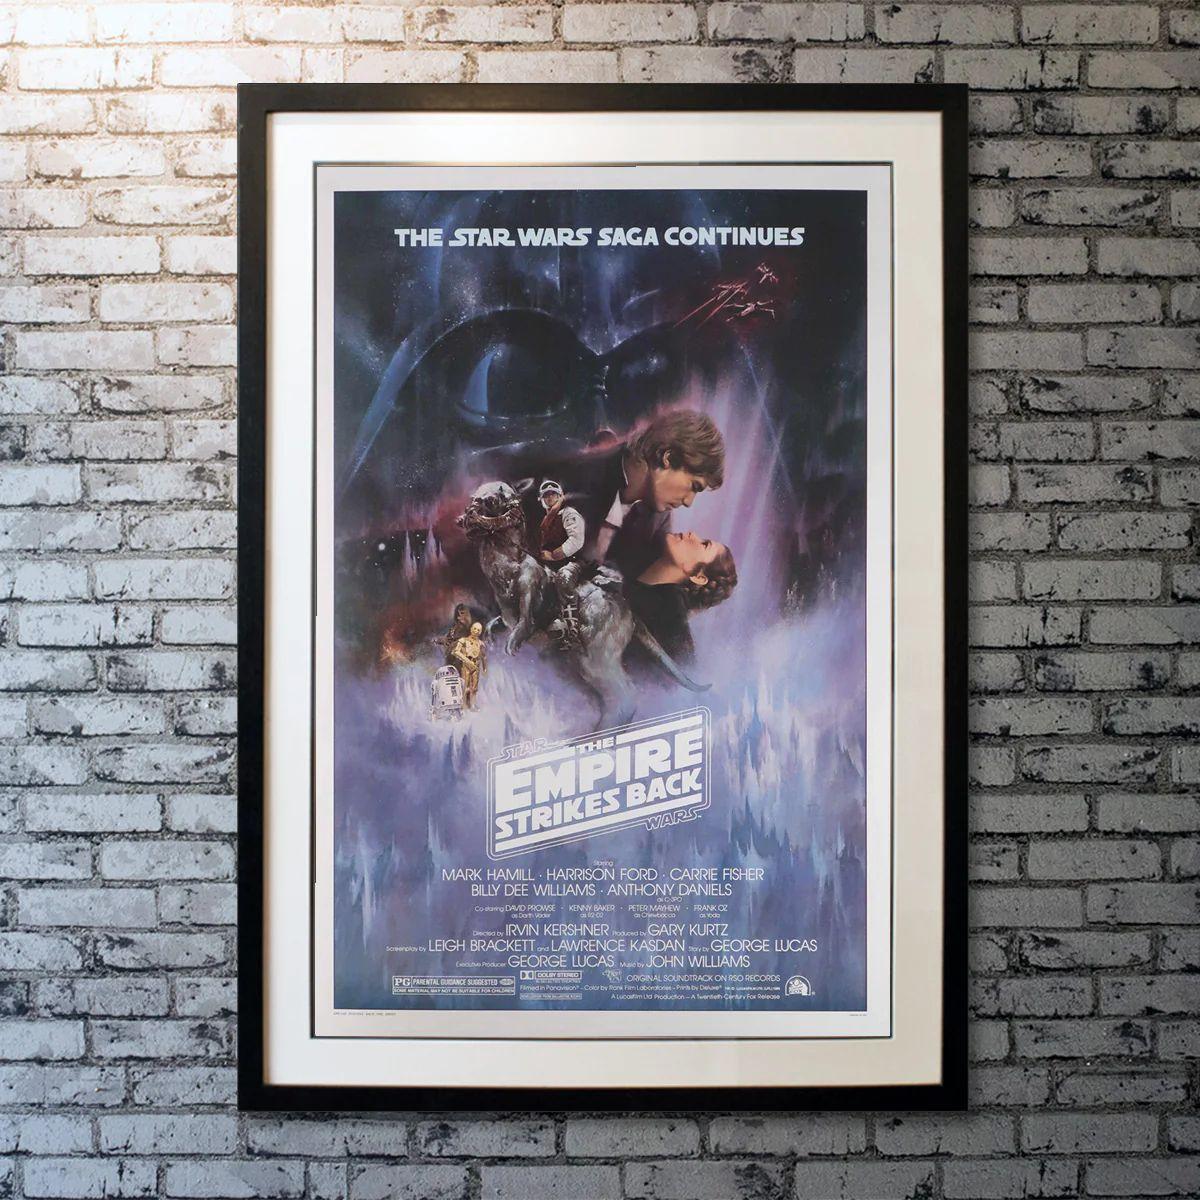 The Empire Strikes Back, Unframed Poster, 1980

Original One Sheet (27 X 41 Inches). After the Rebels are overpowered by the Empire, Luke Skywalker begins his Jedi training with Yoda, while his friends are pursued across the galaxy by Darth Vader